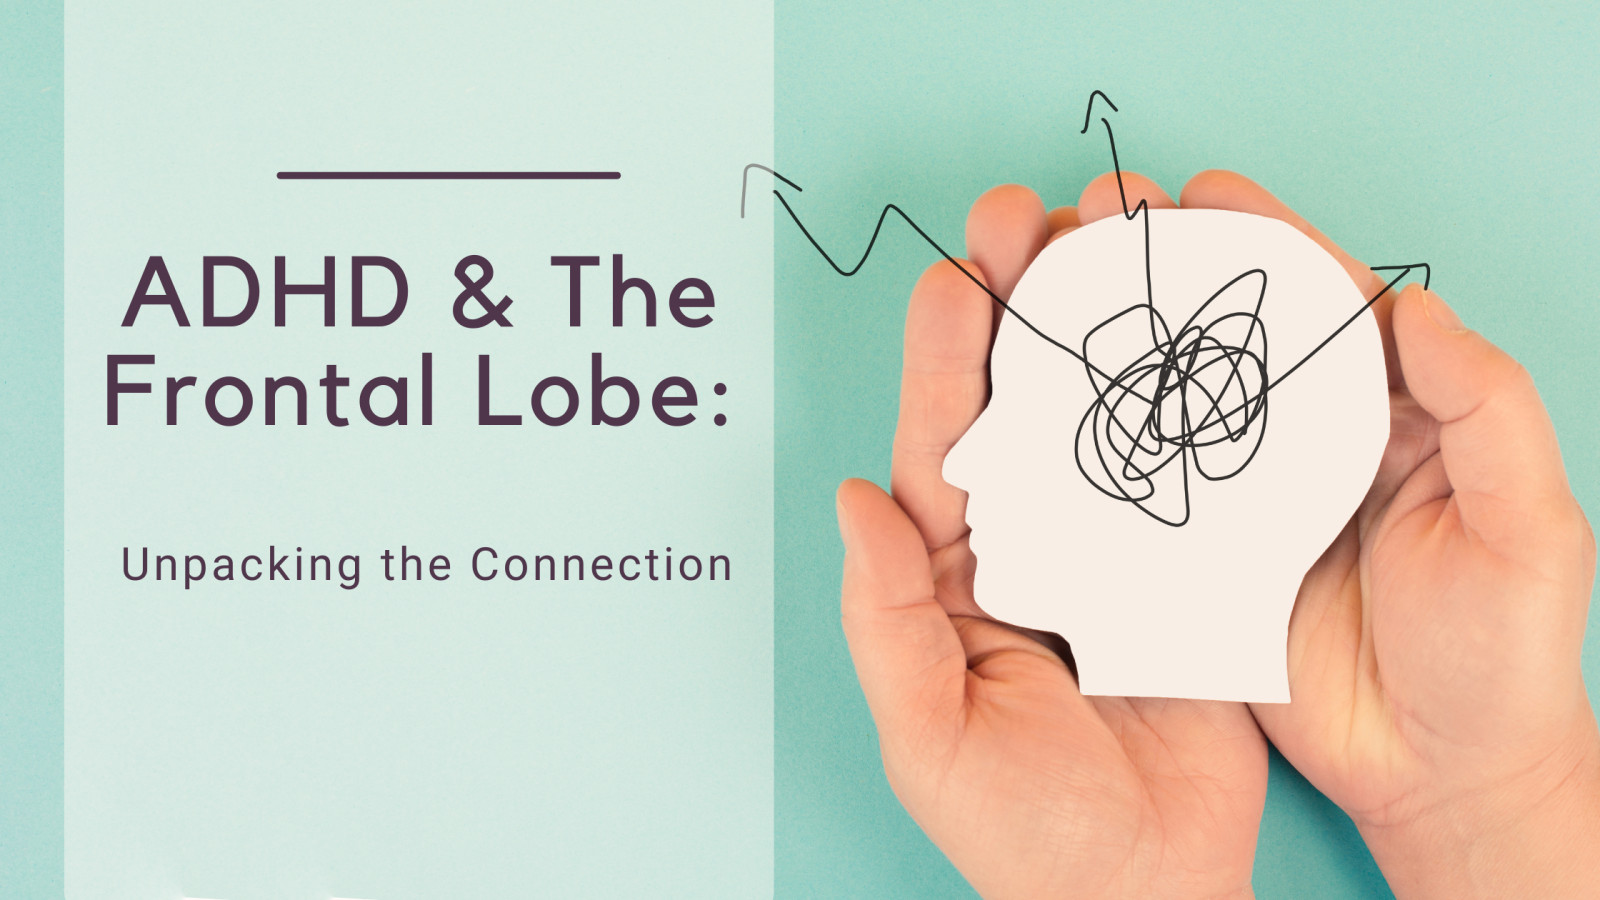 ADHD and the Frontal Lobe: Unpacking the Connection